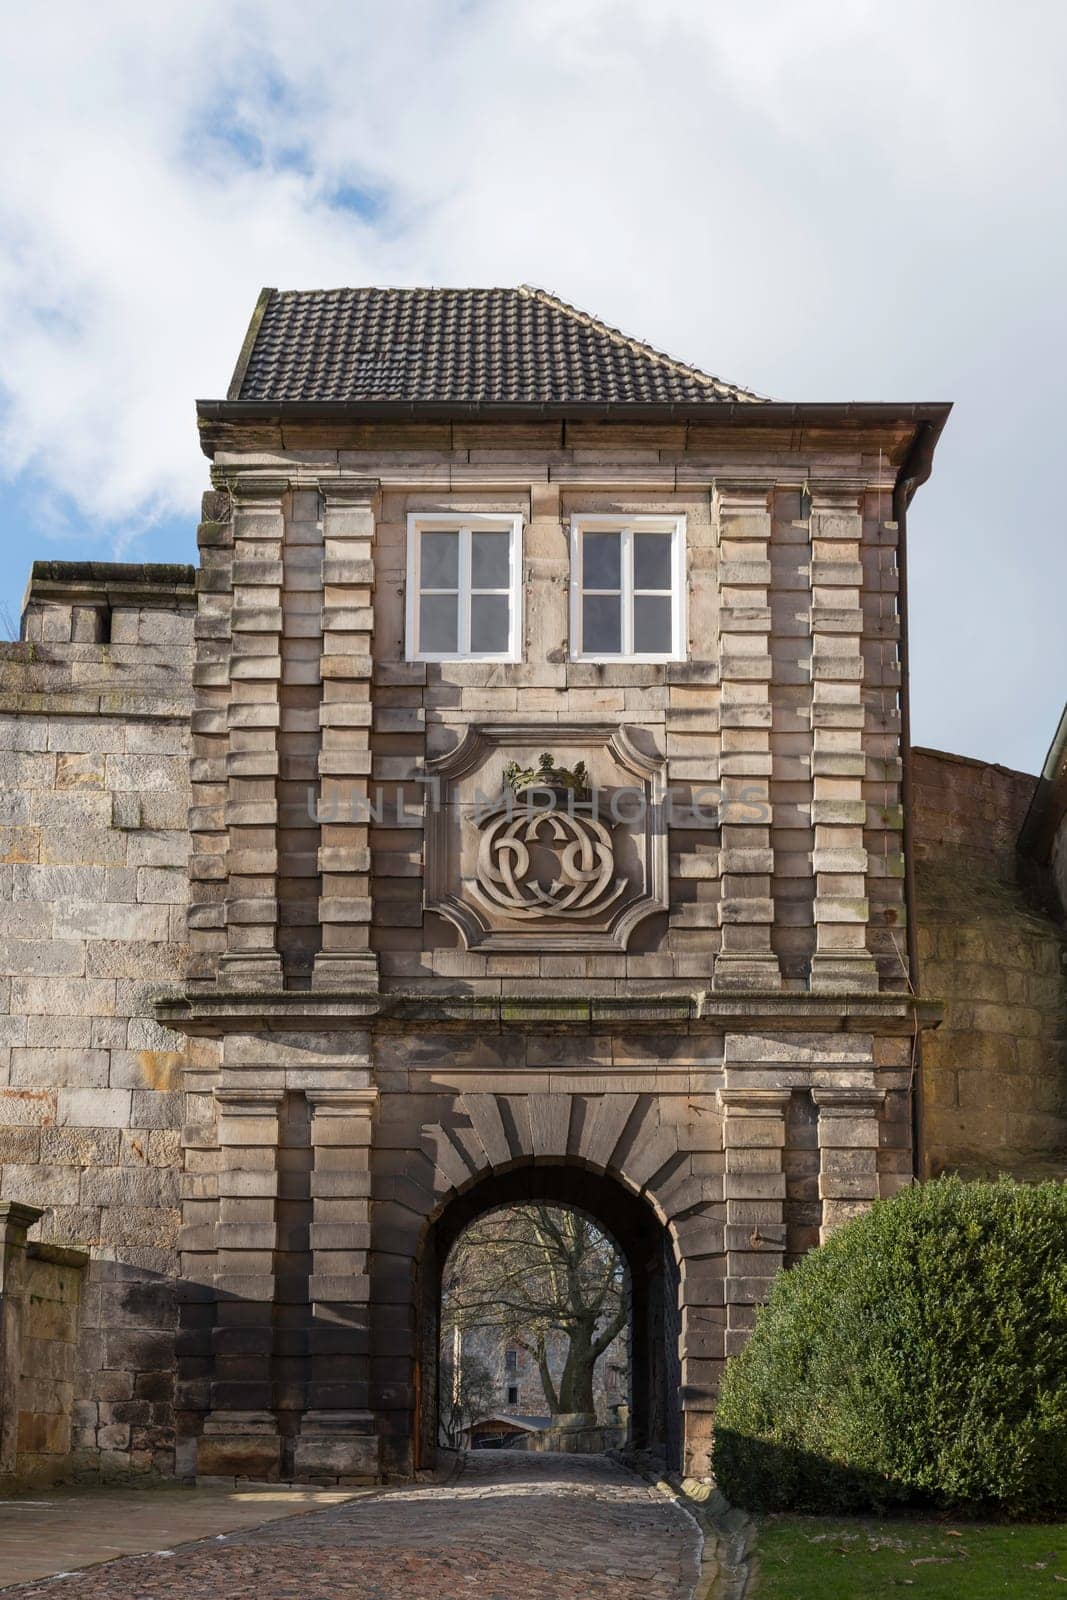 entrace bow of sandstone building in bad bentheim in germany by compuinfoto